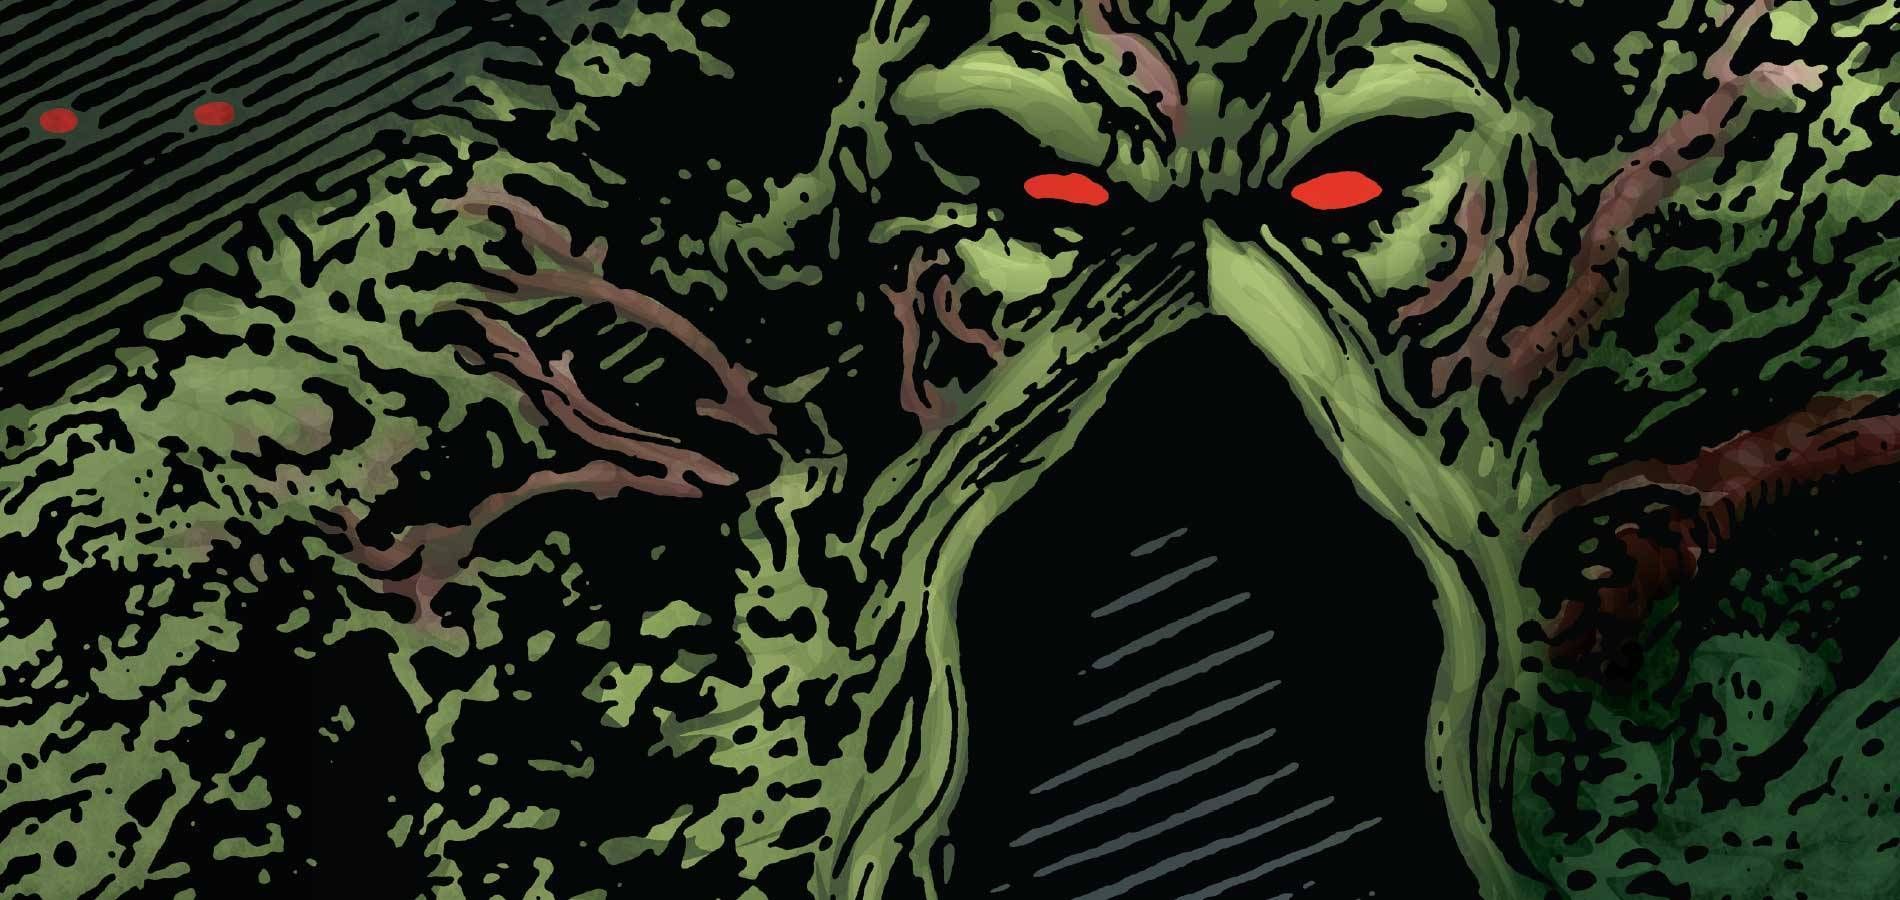 Swamp Thing from DC Comics